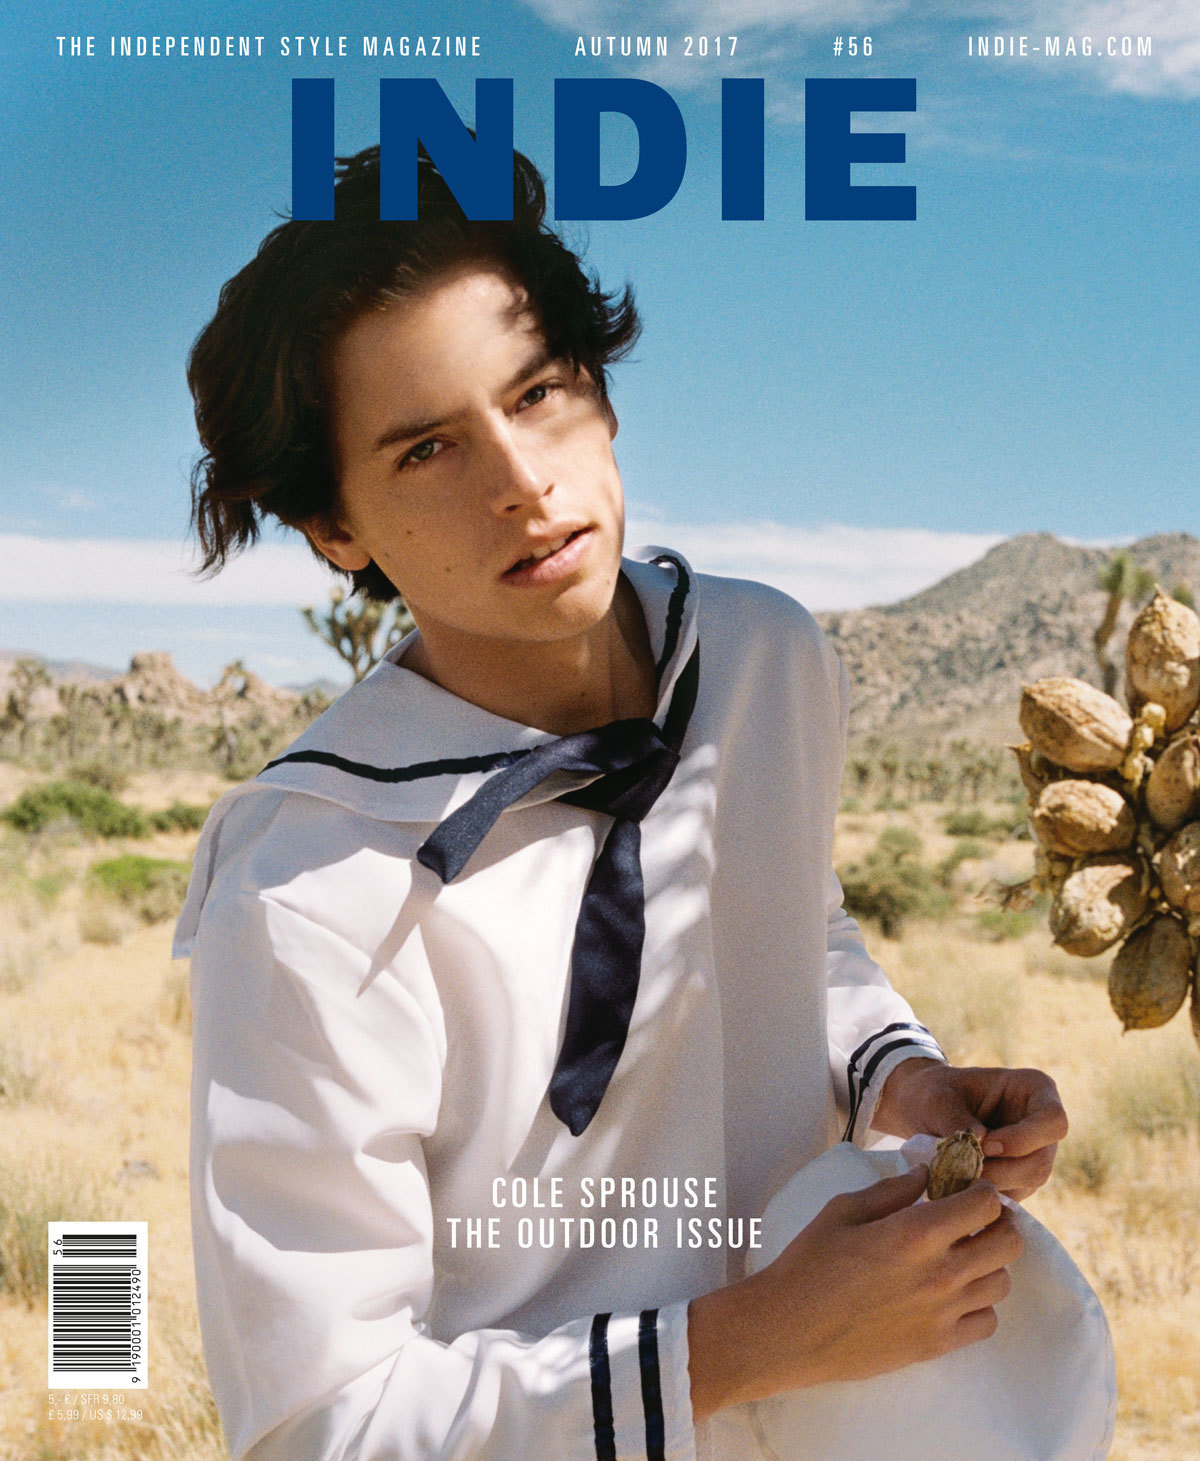 INDIE Digital Issue #56 - Autumn 2017 (both Covers) - PDF